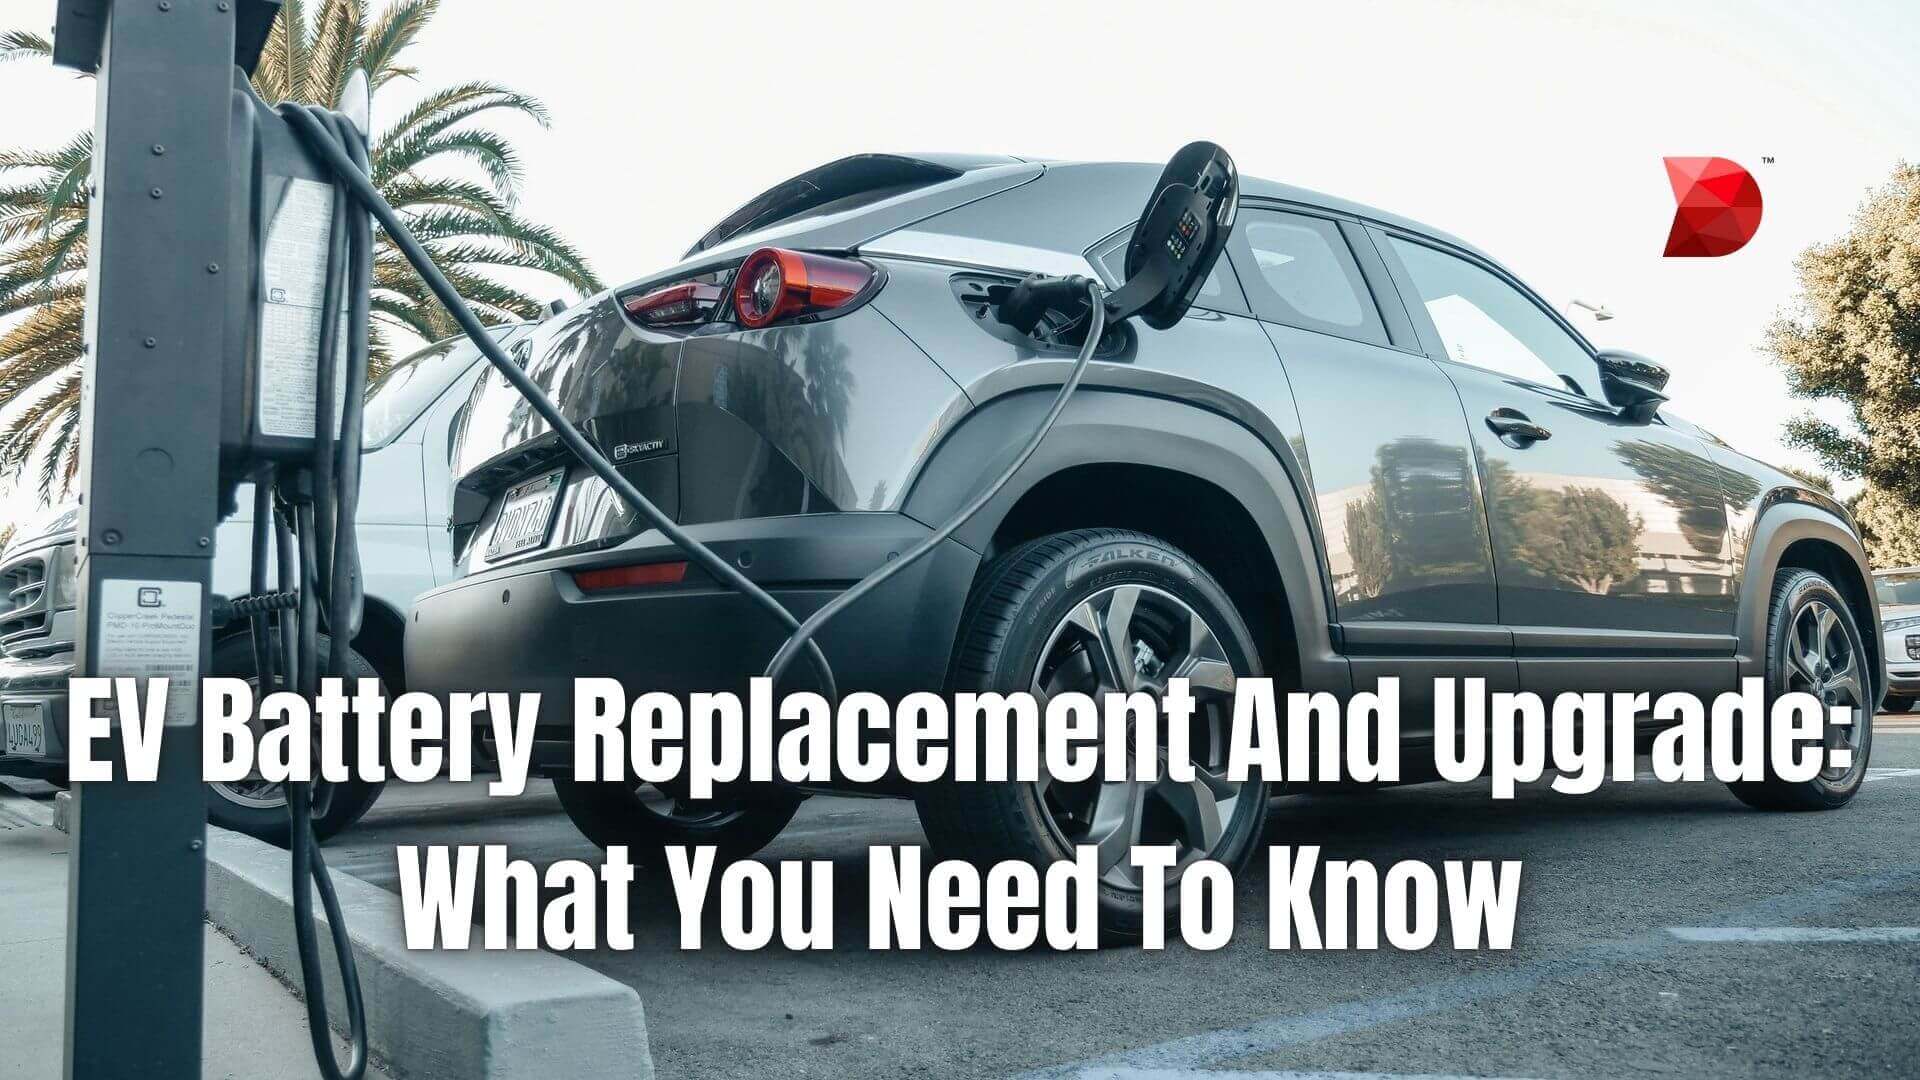 EV Battery Replacement And Upgrade What You Need To Know